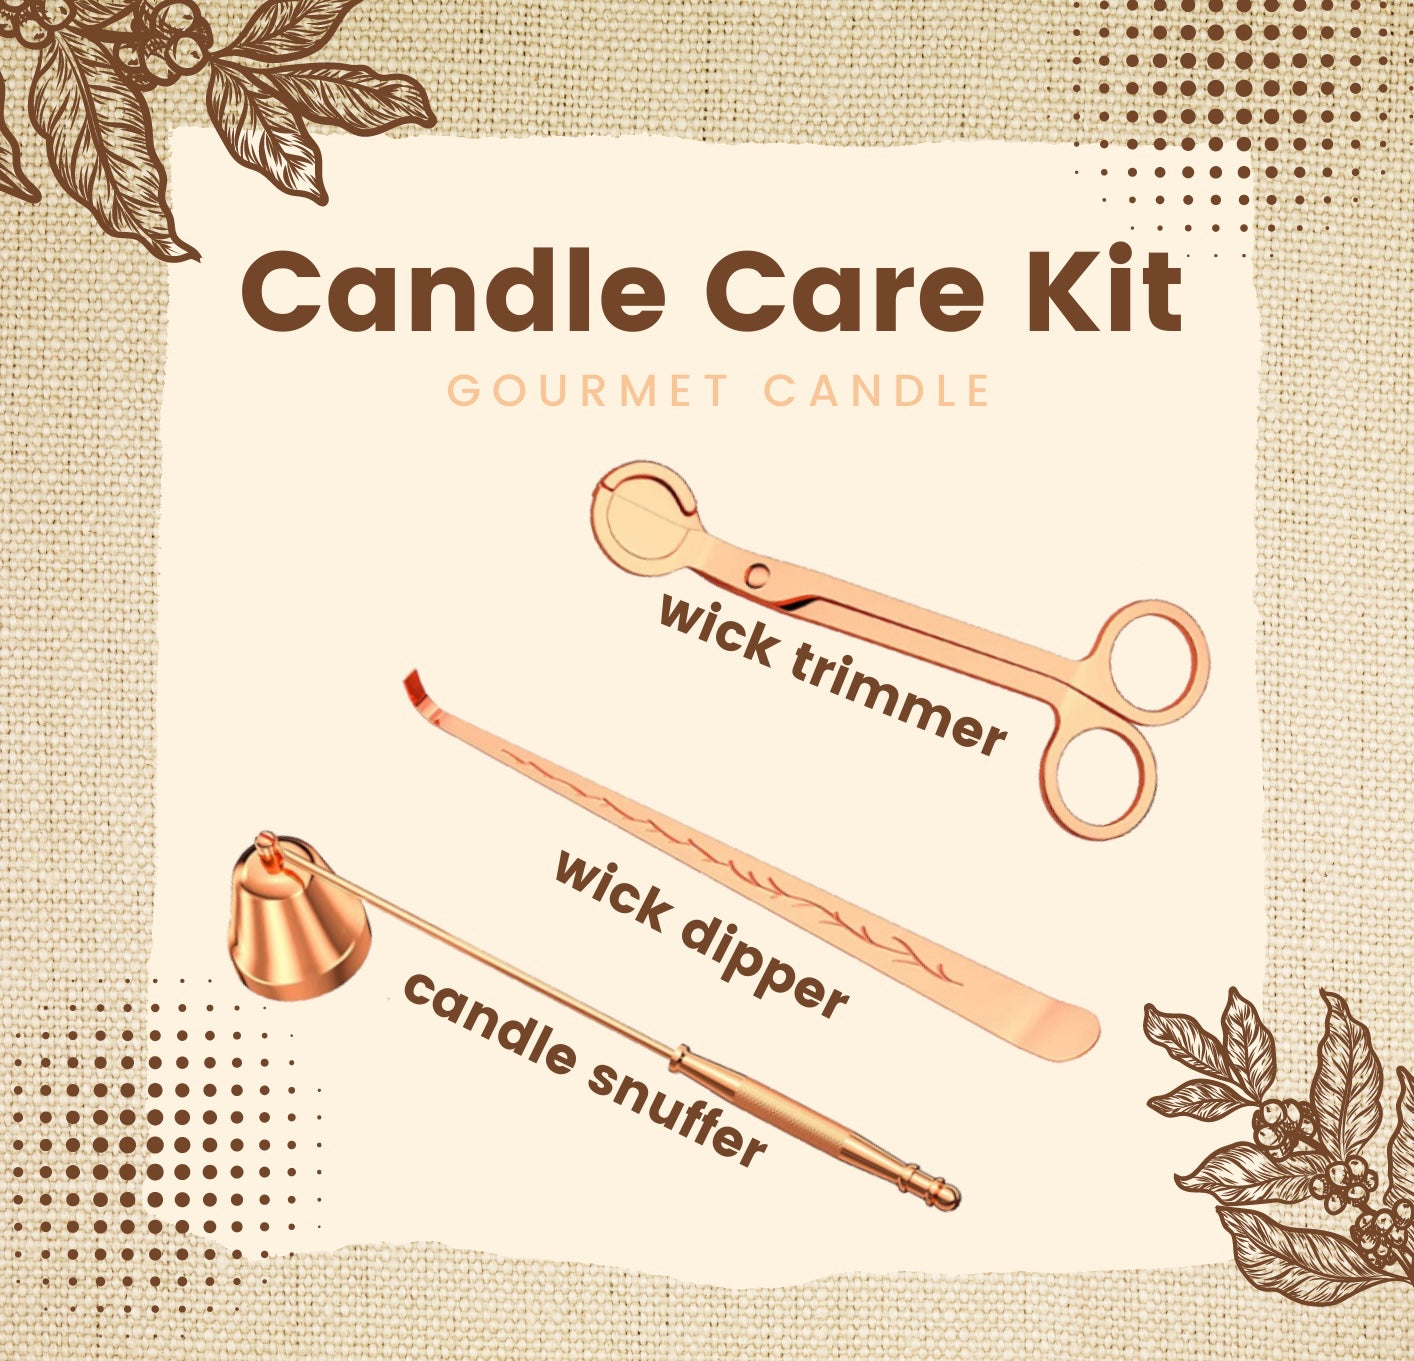 Candle Care 201: Candle Care Tools